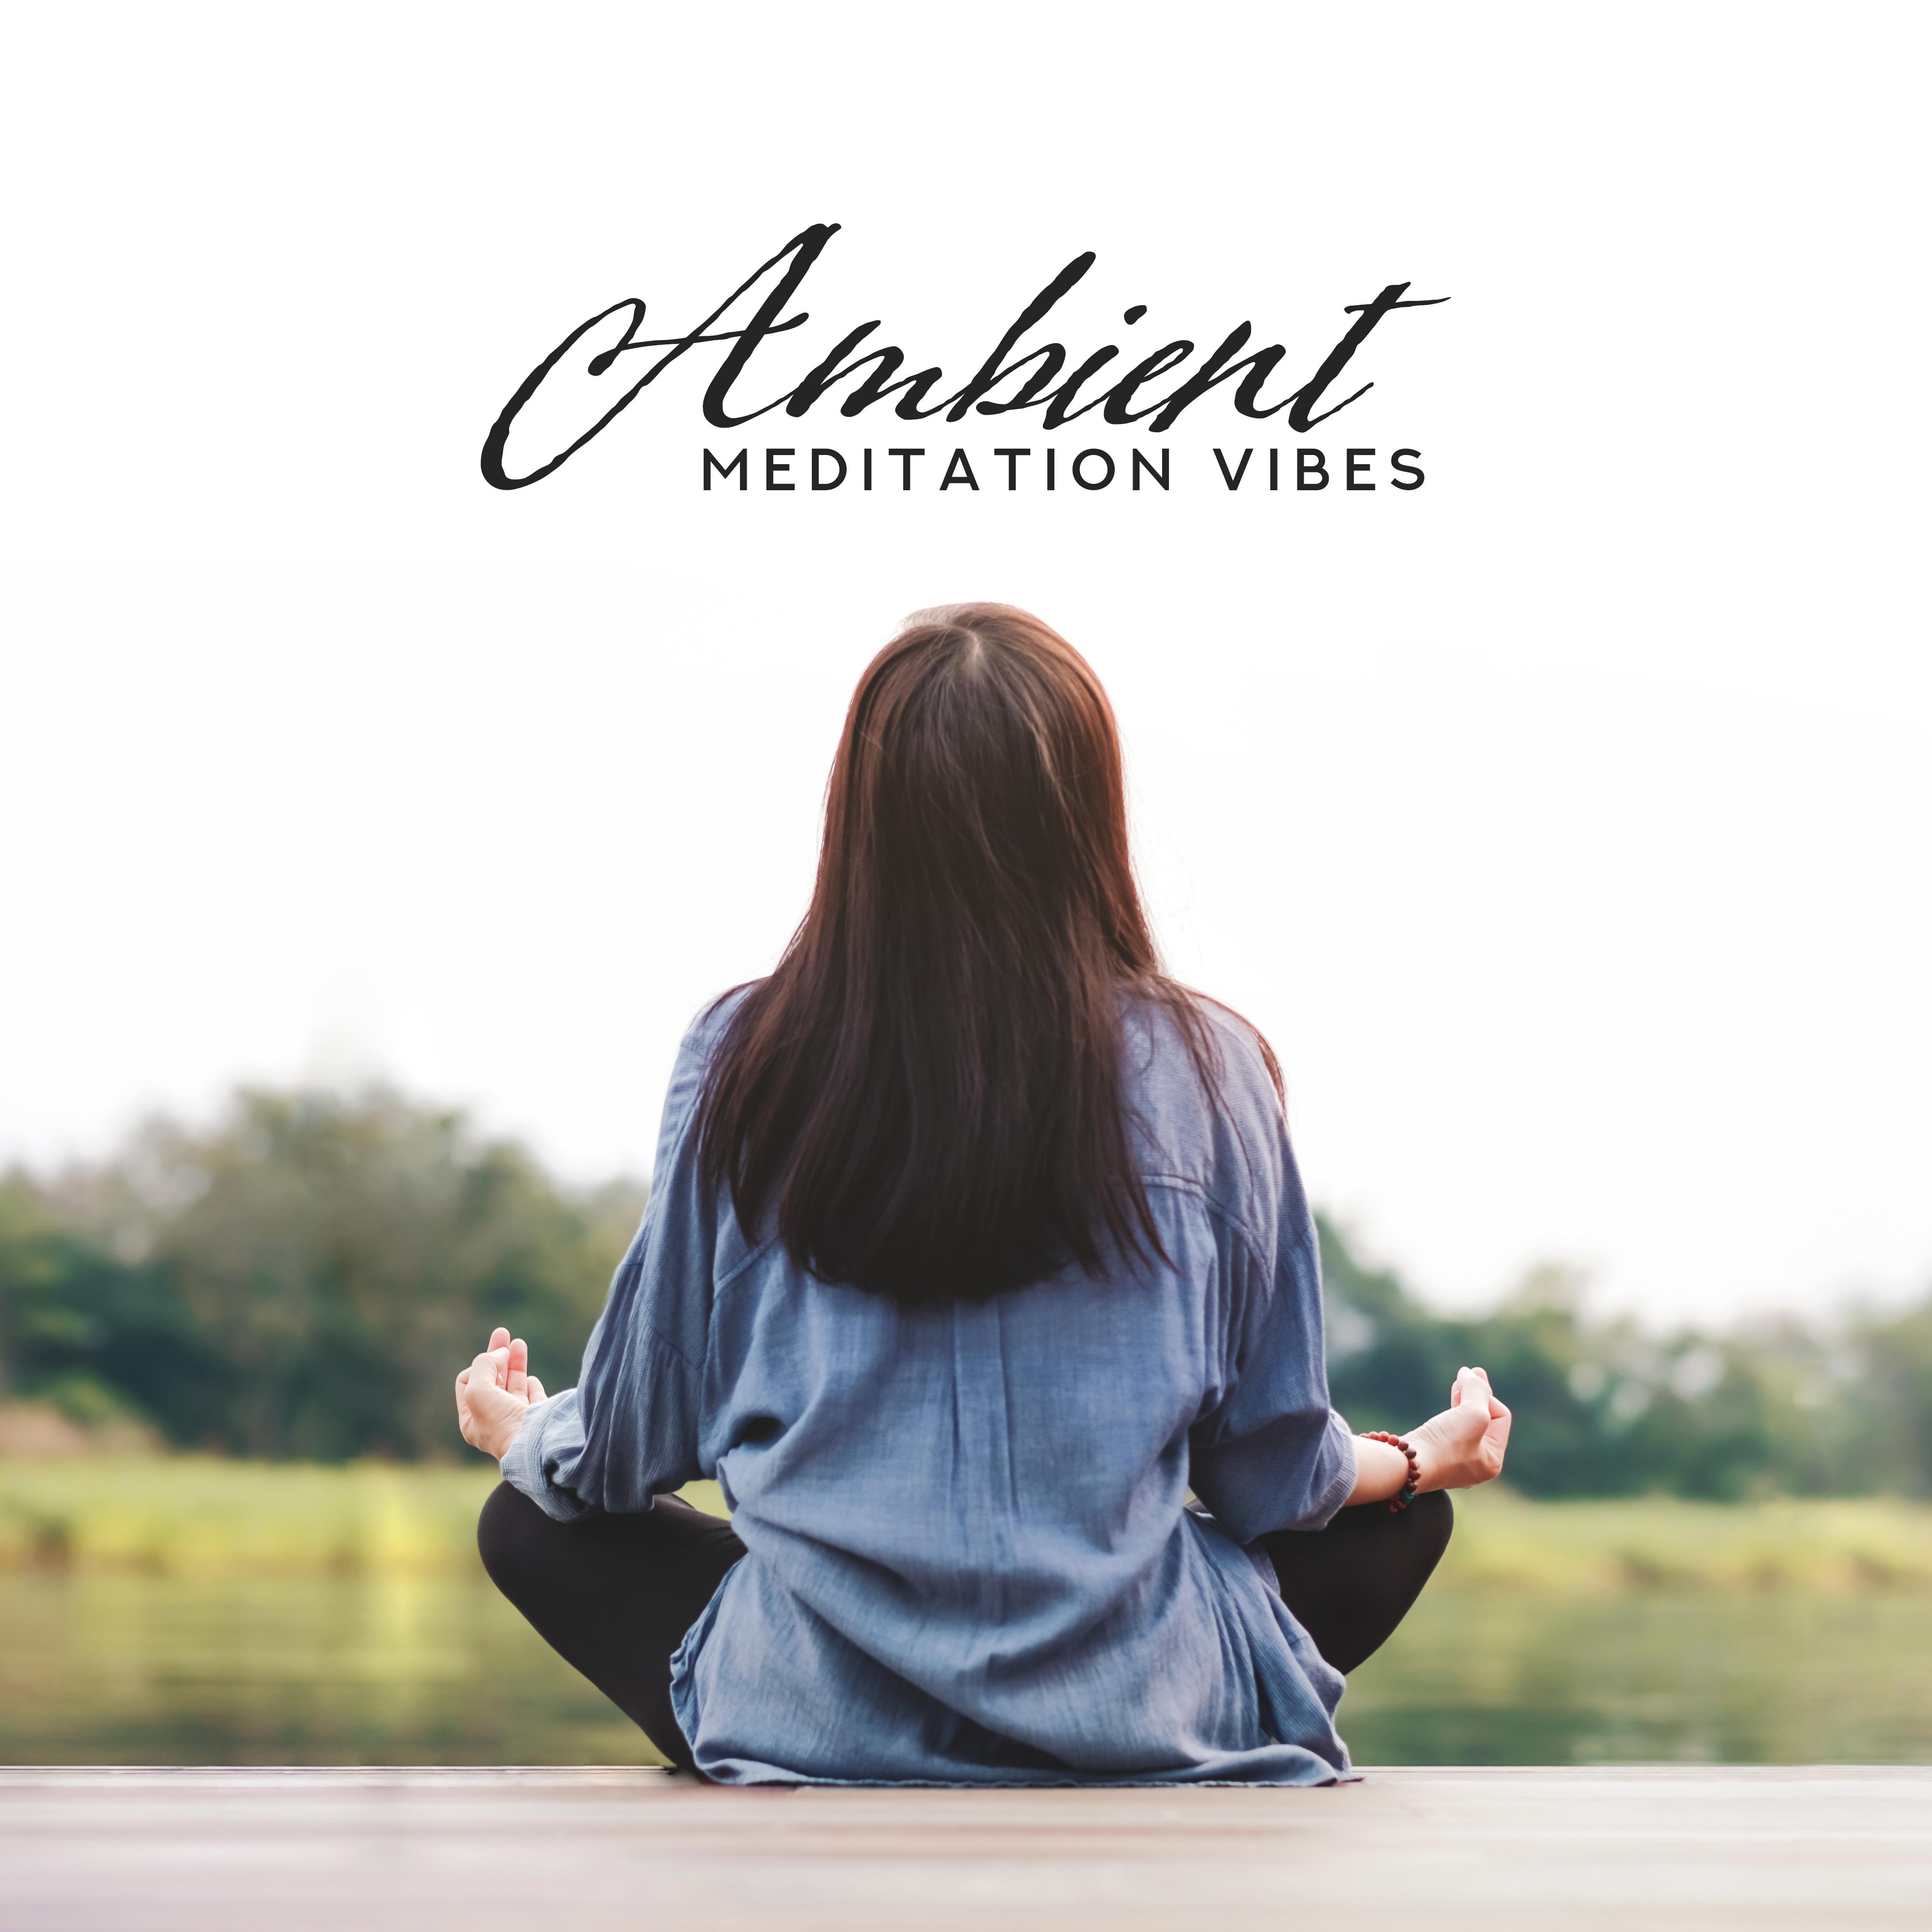 Ambient Meditation Vibes – Mindfulness Relaxation, Zen, Reiki, Reduce Stress, Calming Meditation Mix, Ambient Yoga, Inner Harmony